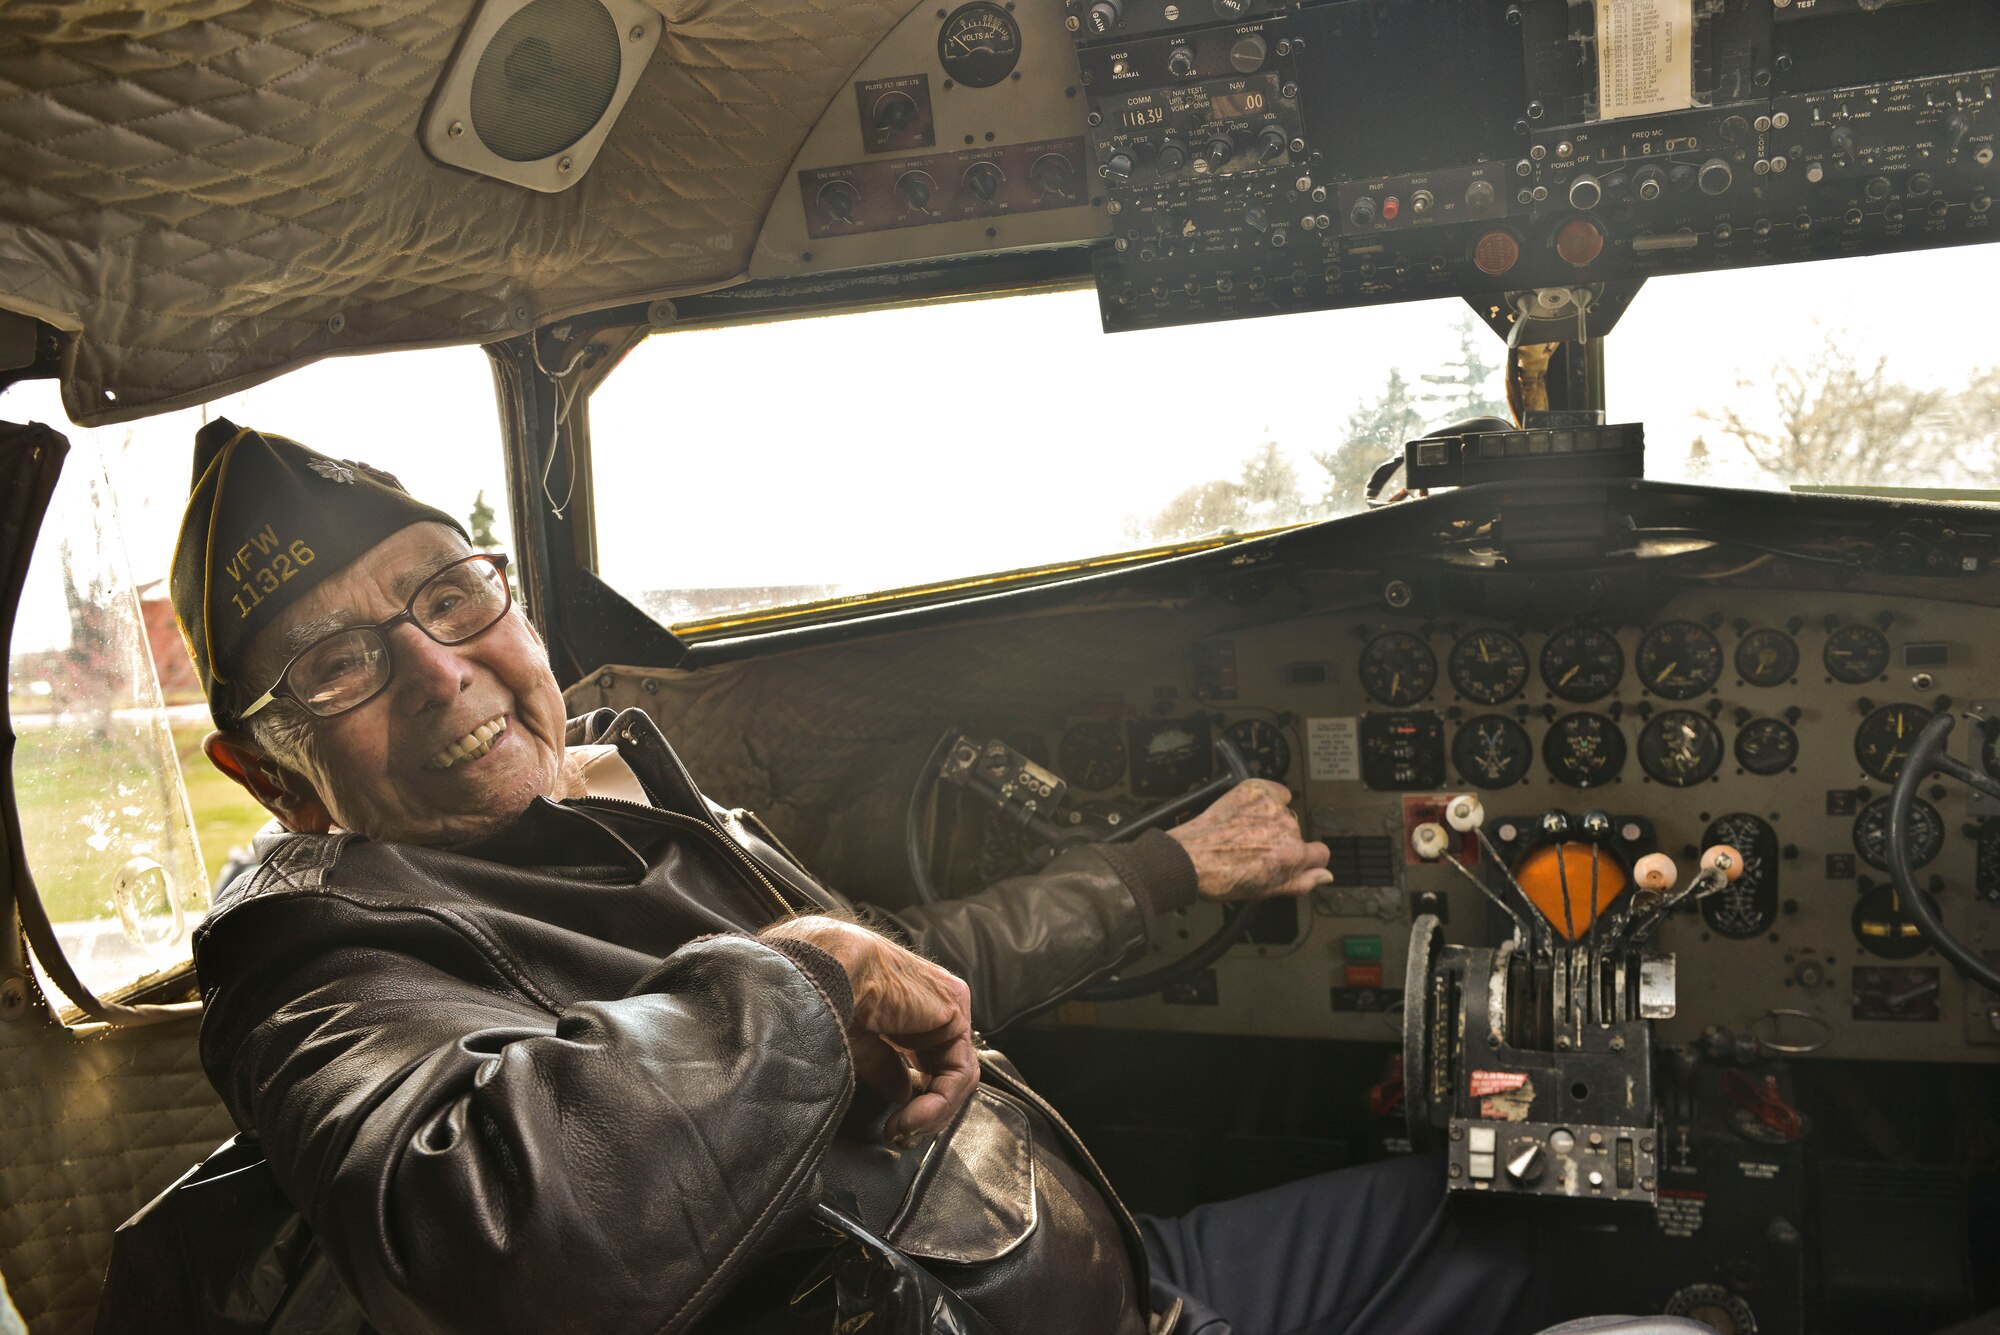 Retired U.S. Air Force Lt. Col. Alston Daniels beams as he sits in the cockpit of a C-47D Skytrain for the first time since 1962 April 7, 2015, at Fairchild AFB, Wash. Daniels flew the C-47 during World War II and had the chance to visit the aircraft while it is on static display. (U.S. Air Force photo/Staff Sgt. Alex Montes)